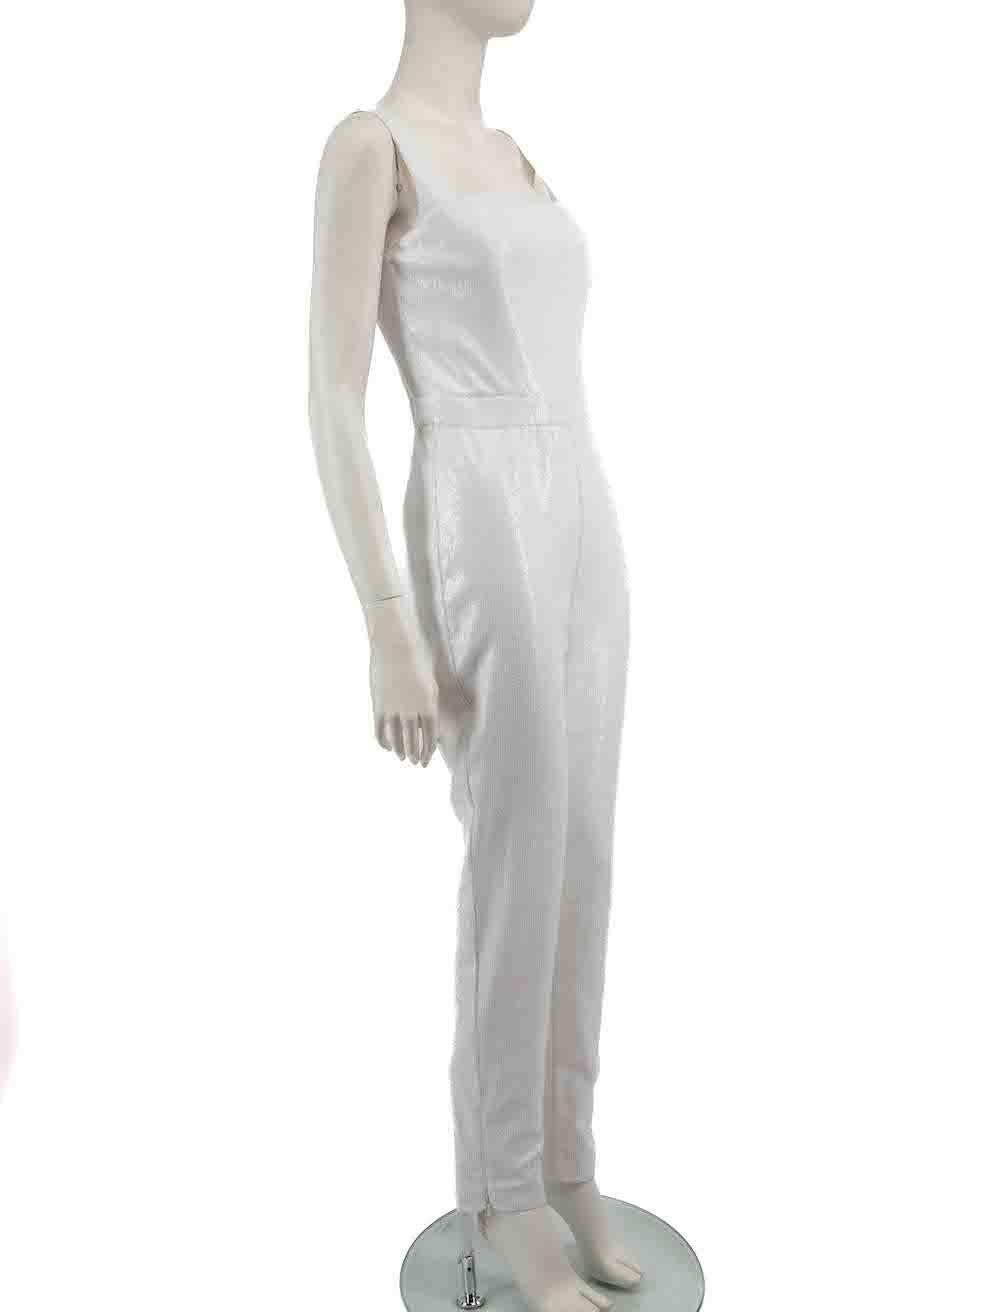 CONDITION is Never worn. No visible wear to jumpsuit is evident on this new designer resale item.
 
 
 
 Details
 
 
 White
 
 Synthetic
 
 Jumpsuit
 
 Sequinned
 
 Sleeveless
 
 Square neckline
 
 Slim leg
 
 Back zip and hook fastening
 
 
 
 
 
